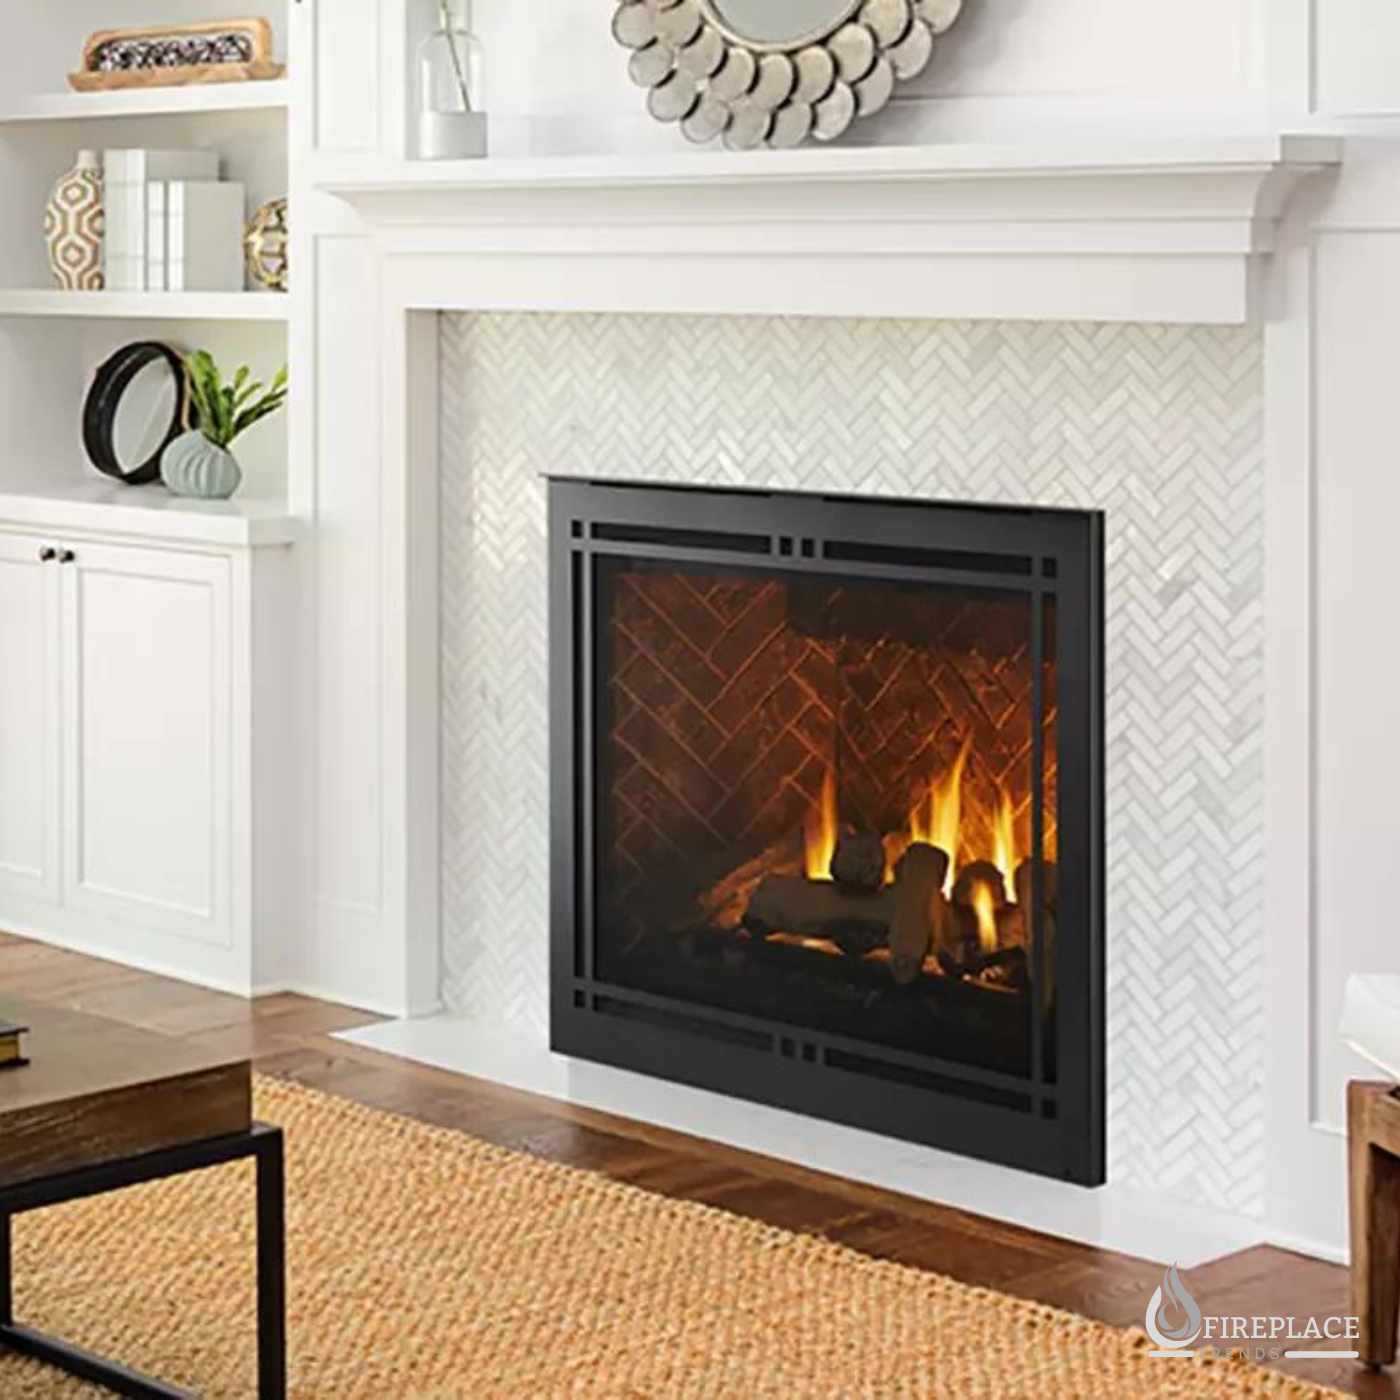 Majestic - Meridian 42" Modern Direct Vent Traditional Gas Fireplace with Intellifire Touch Ignition | Fireplace Trends Webstore